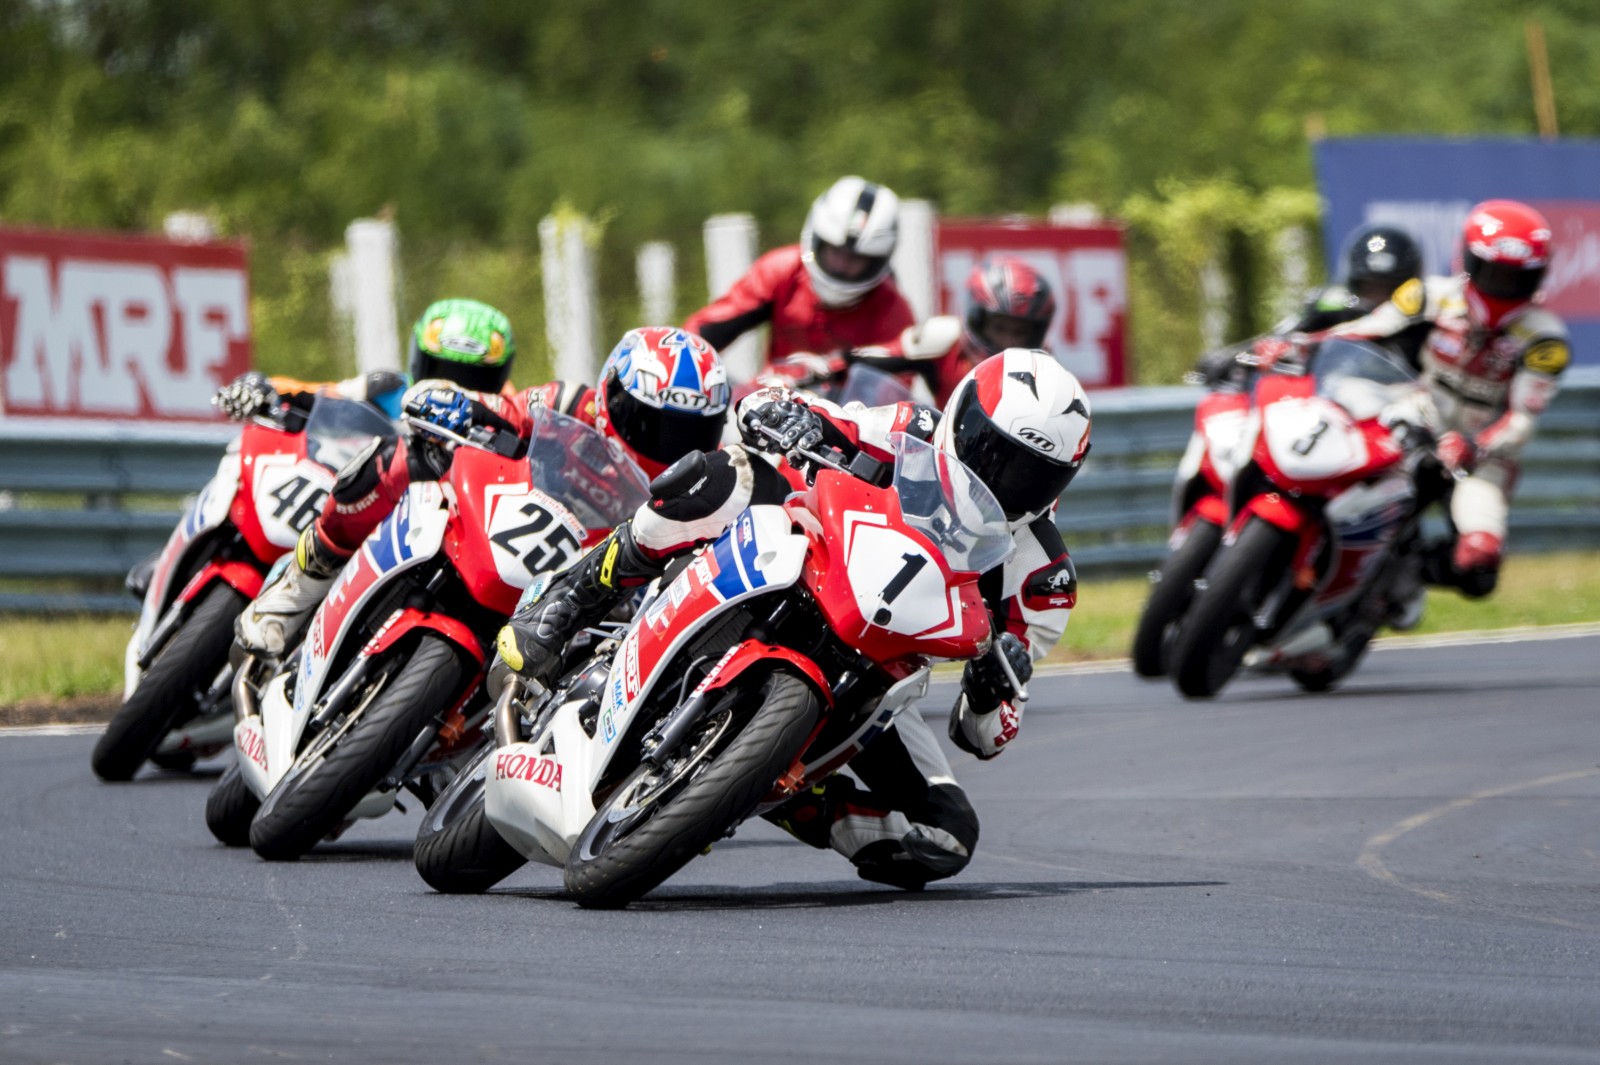 Honda One Make Race - Racers In Action